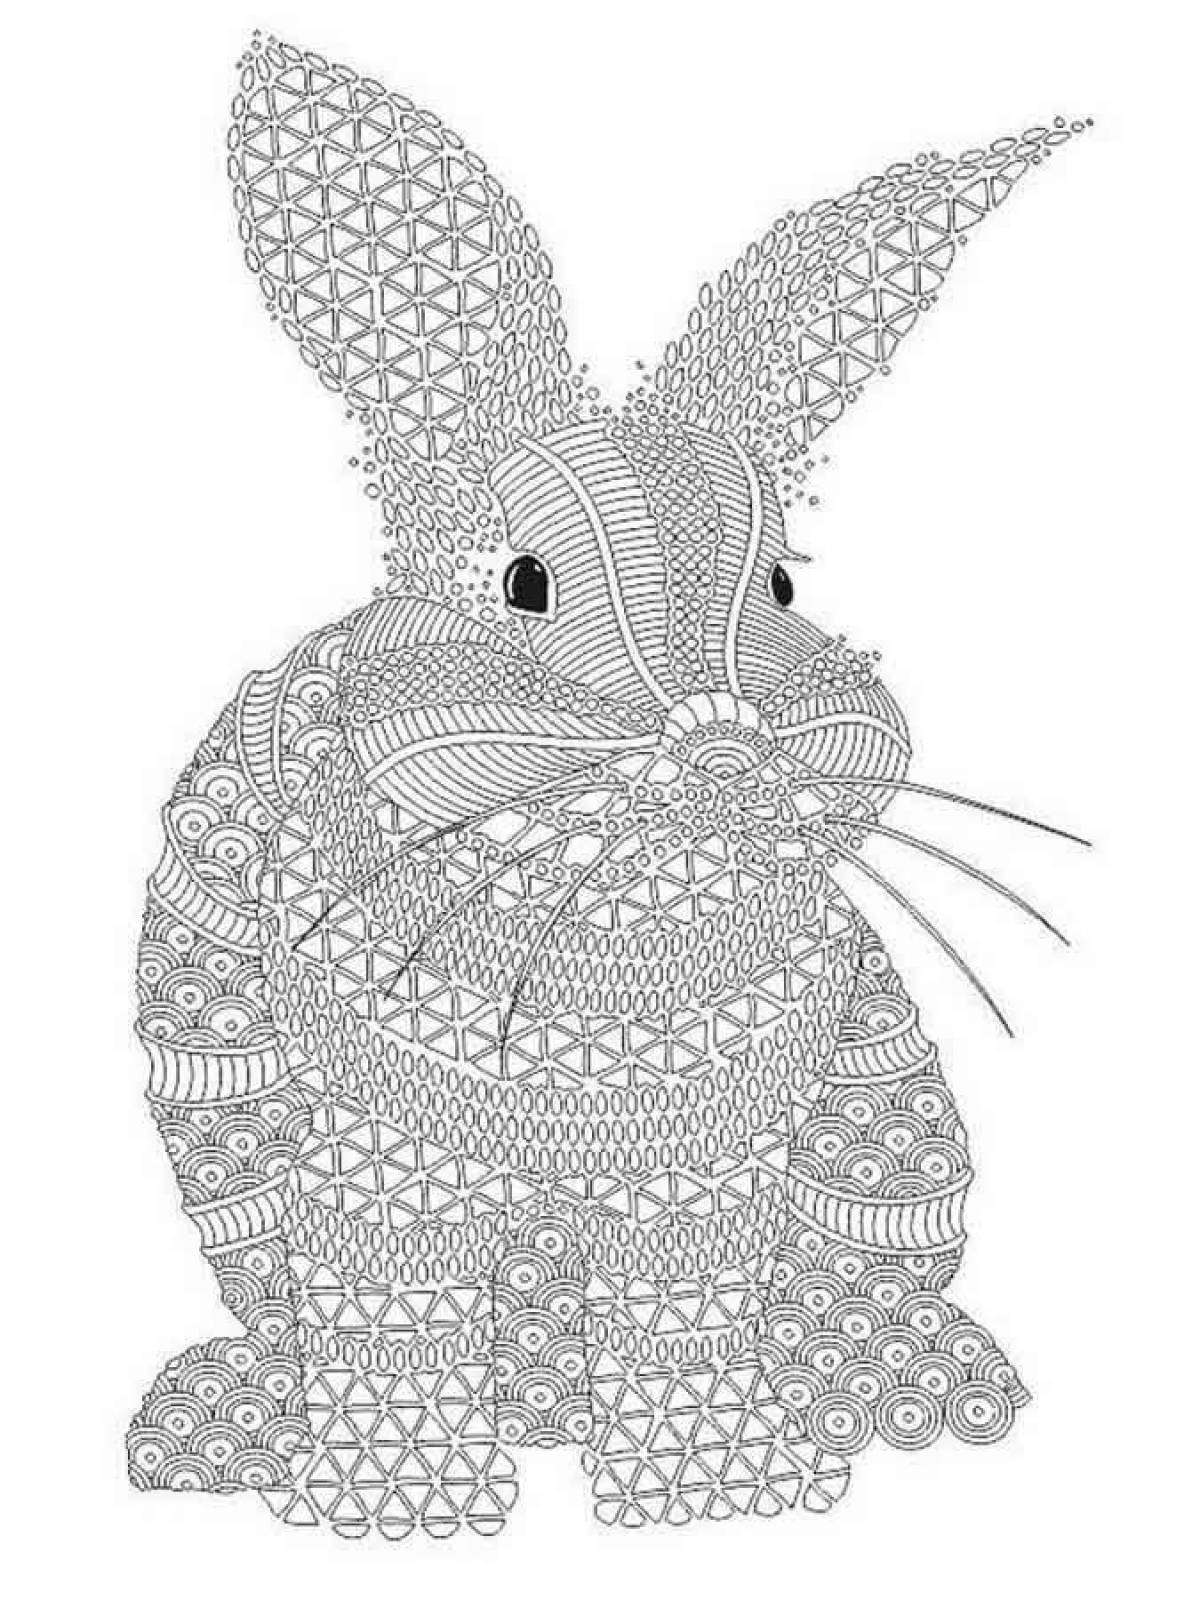 Exquisite anti-stress bunny coloring book